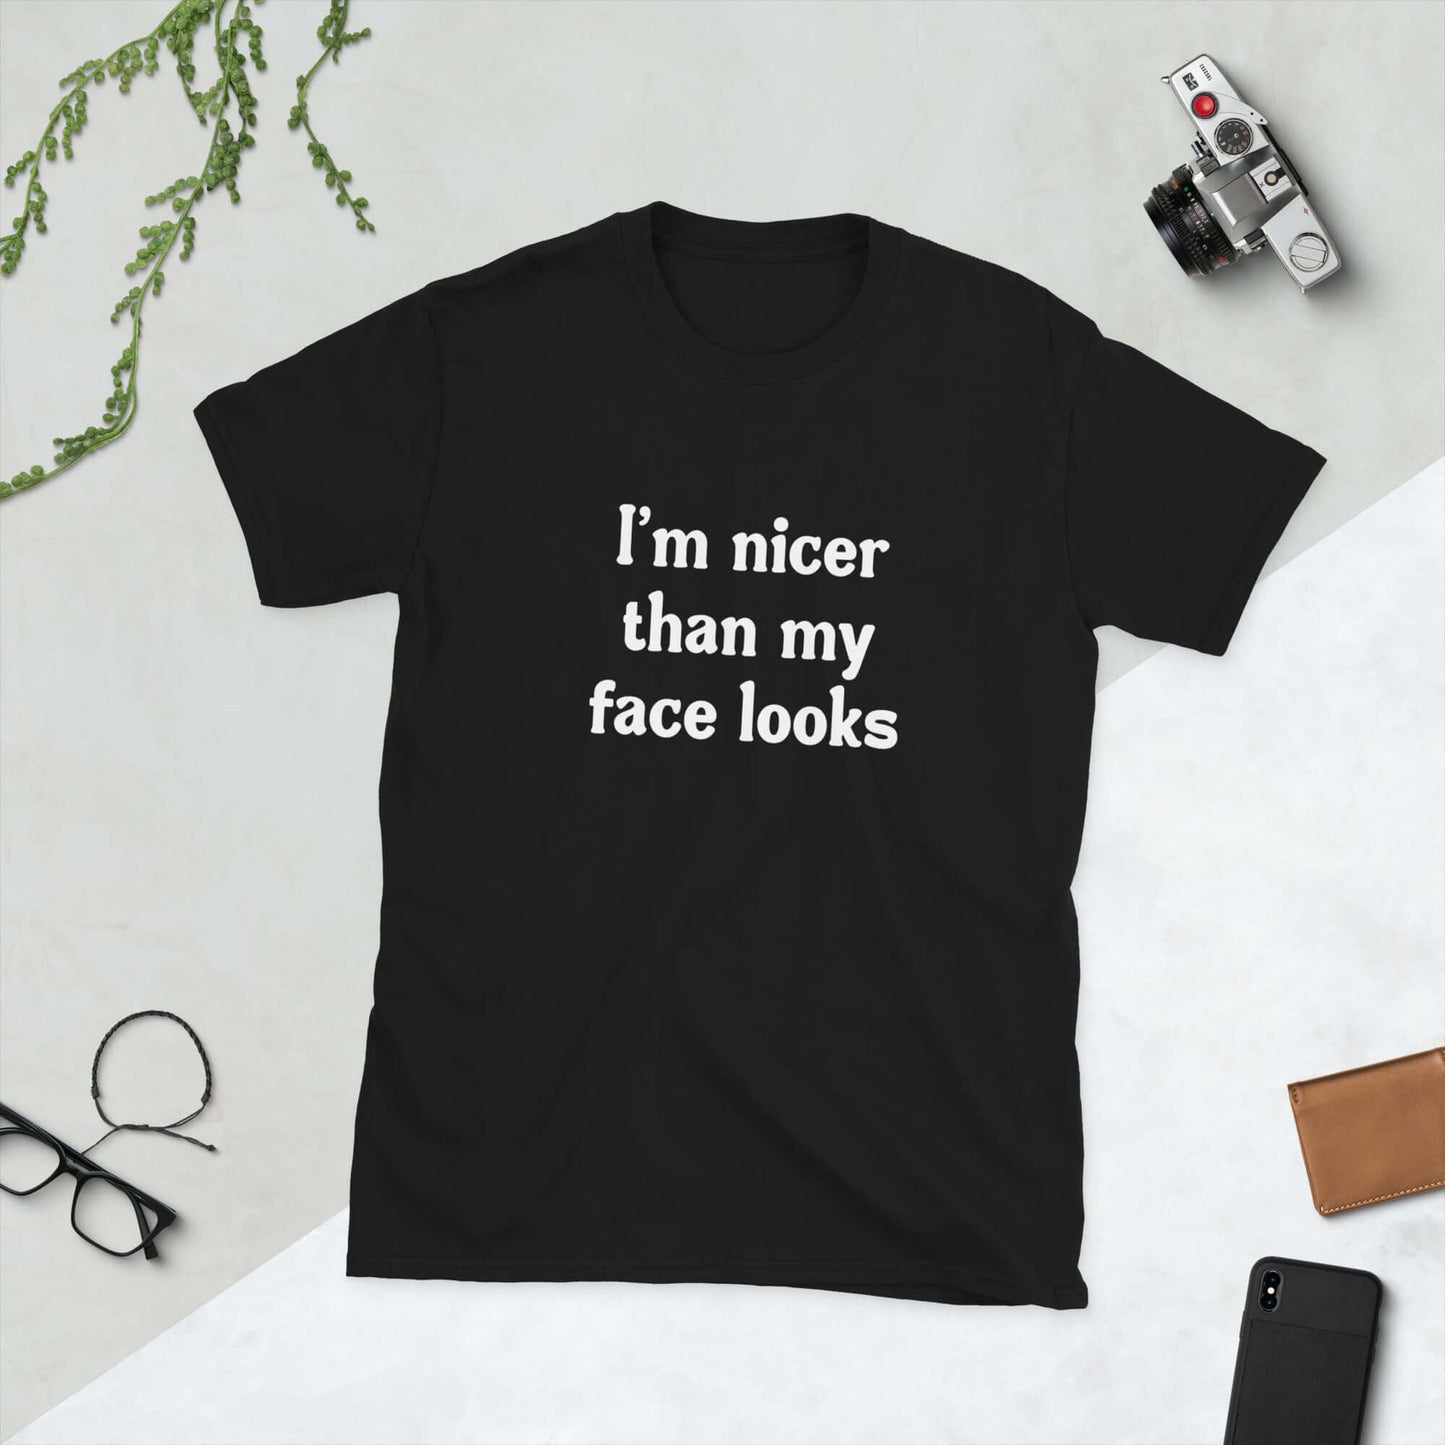 Black t-shirt that says I'm nicer than my face looks printed on the front.